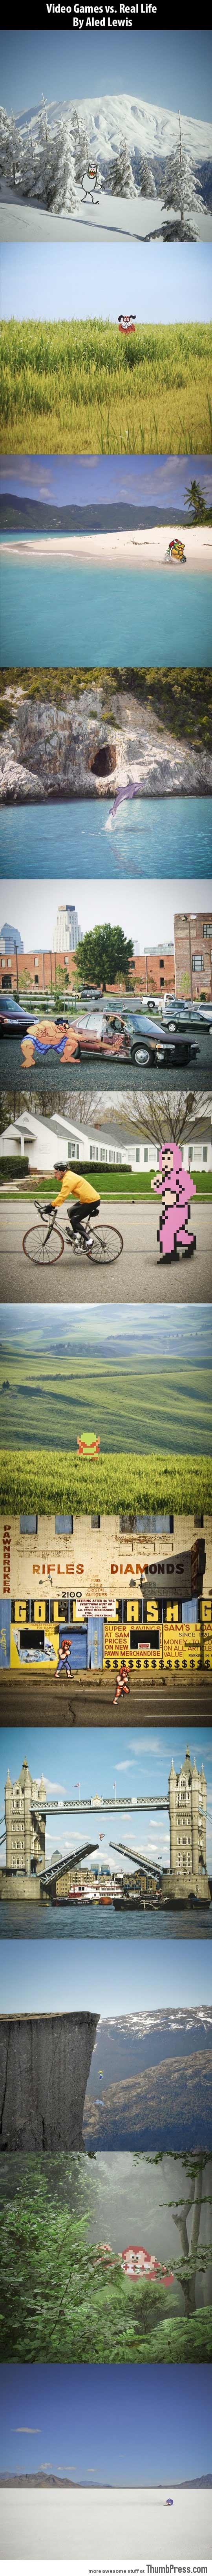 VIDEO GAMES VS. REAL LIFE.